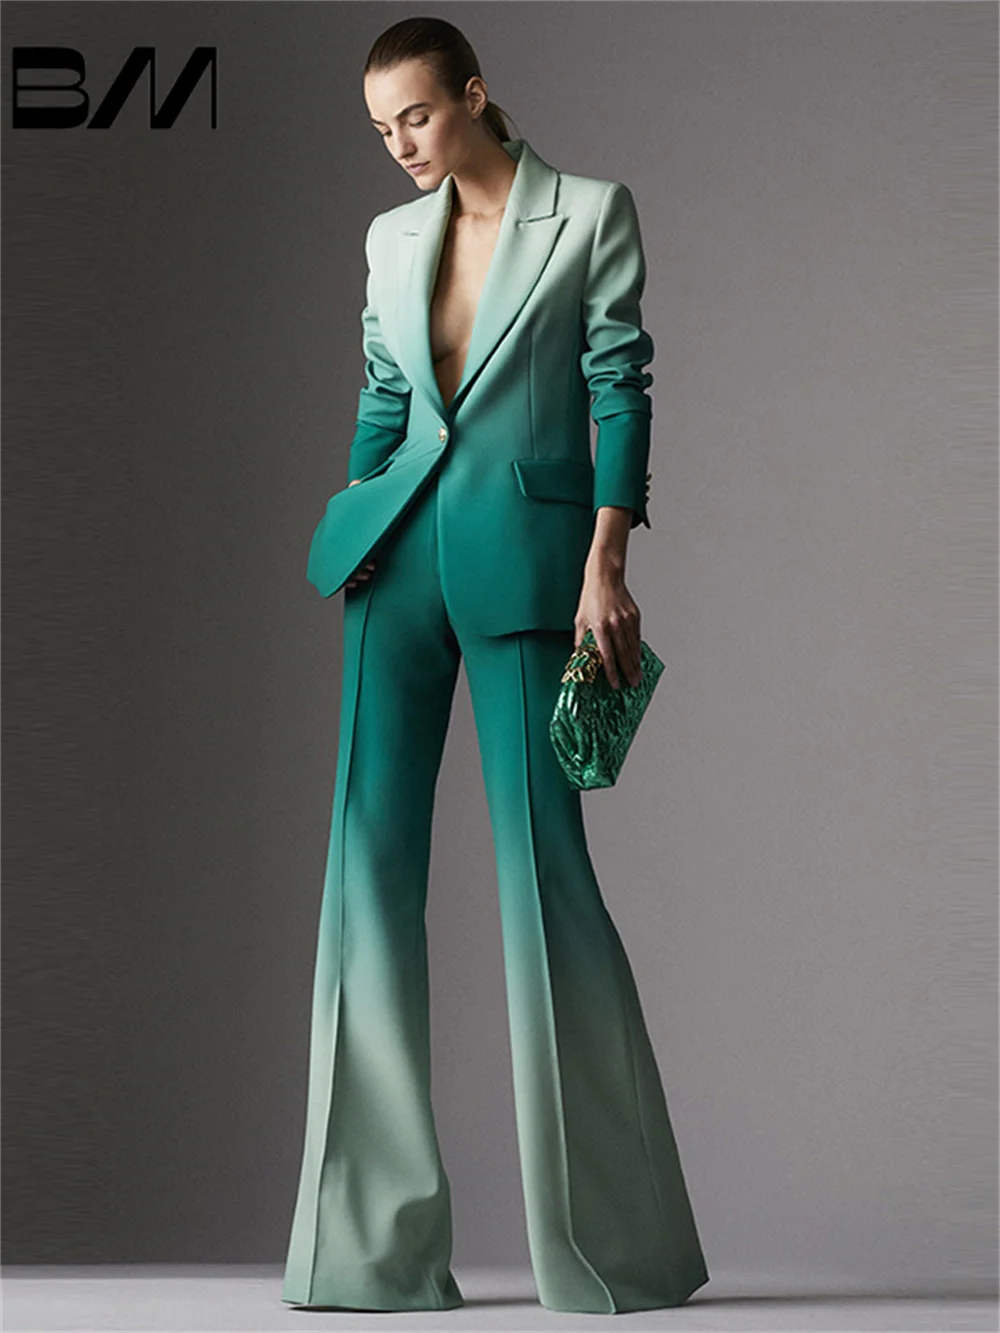 Charming Two-Piece Gradient Slim Fit Suit And Flared Trousers Suit Classic Business Woman Office Wedding Suit